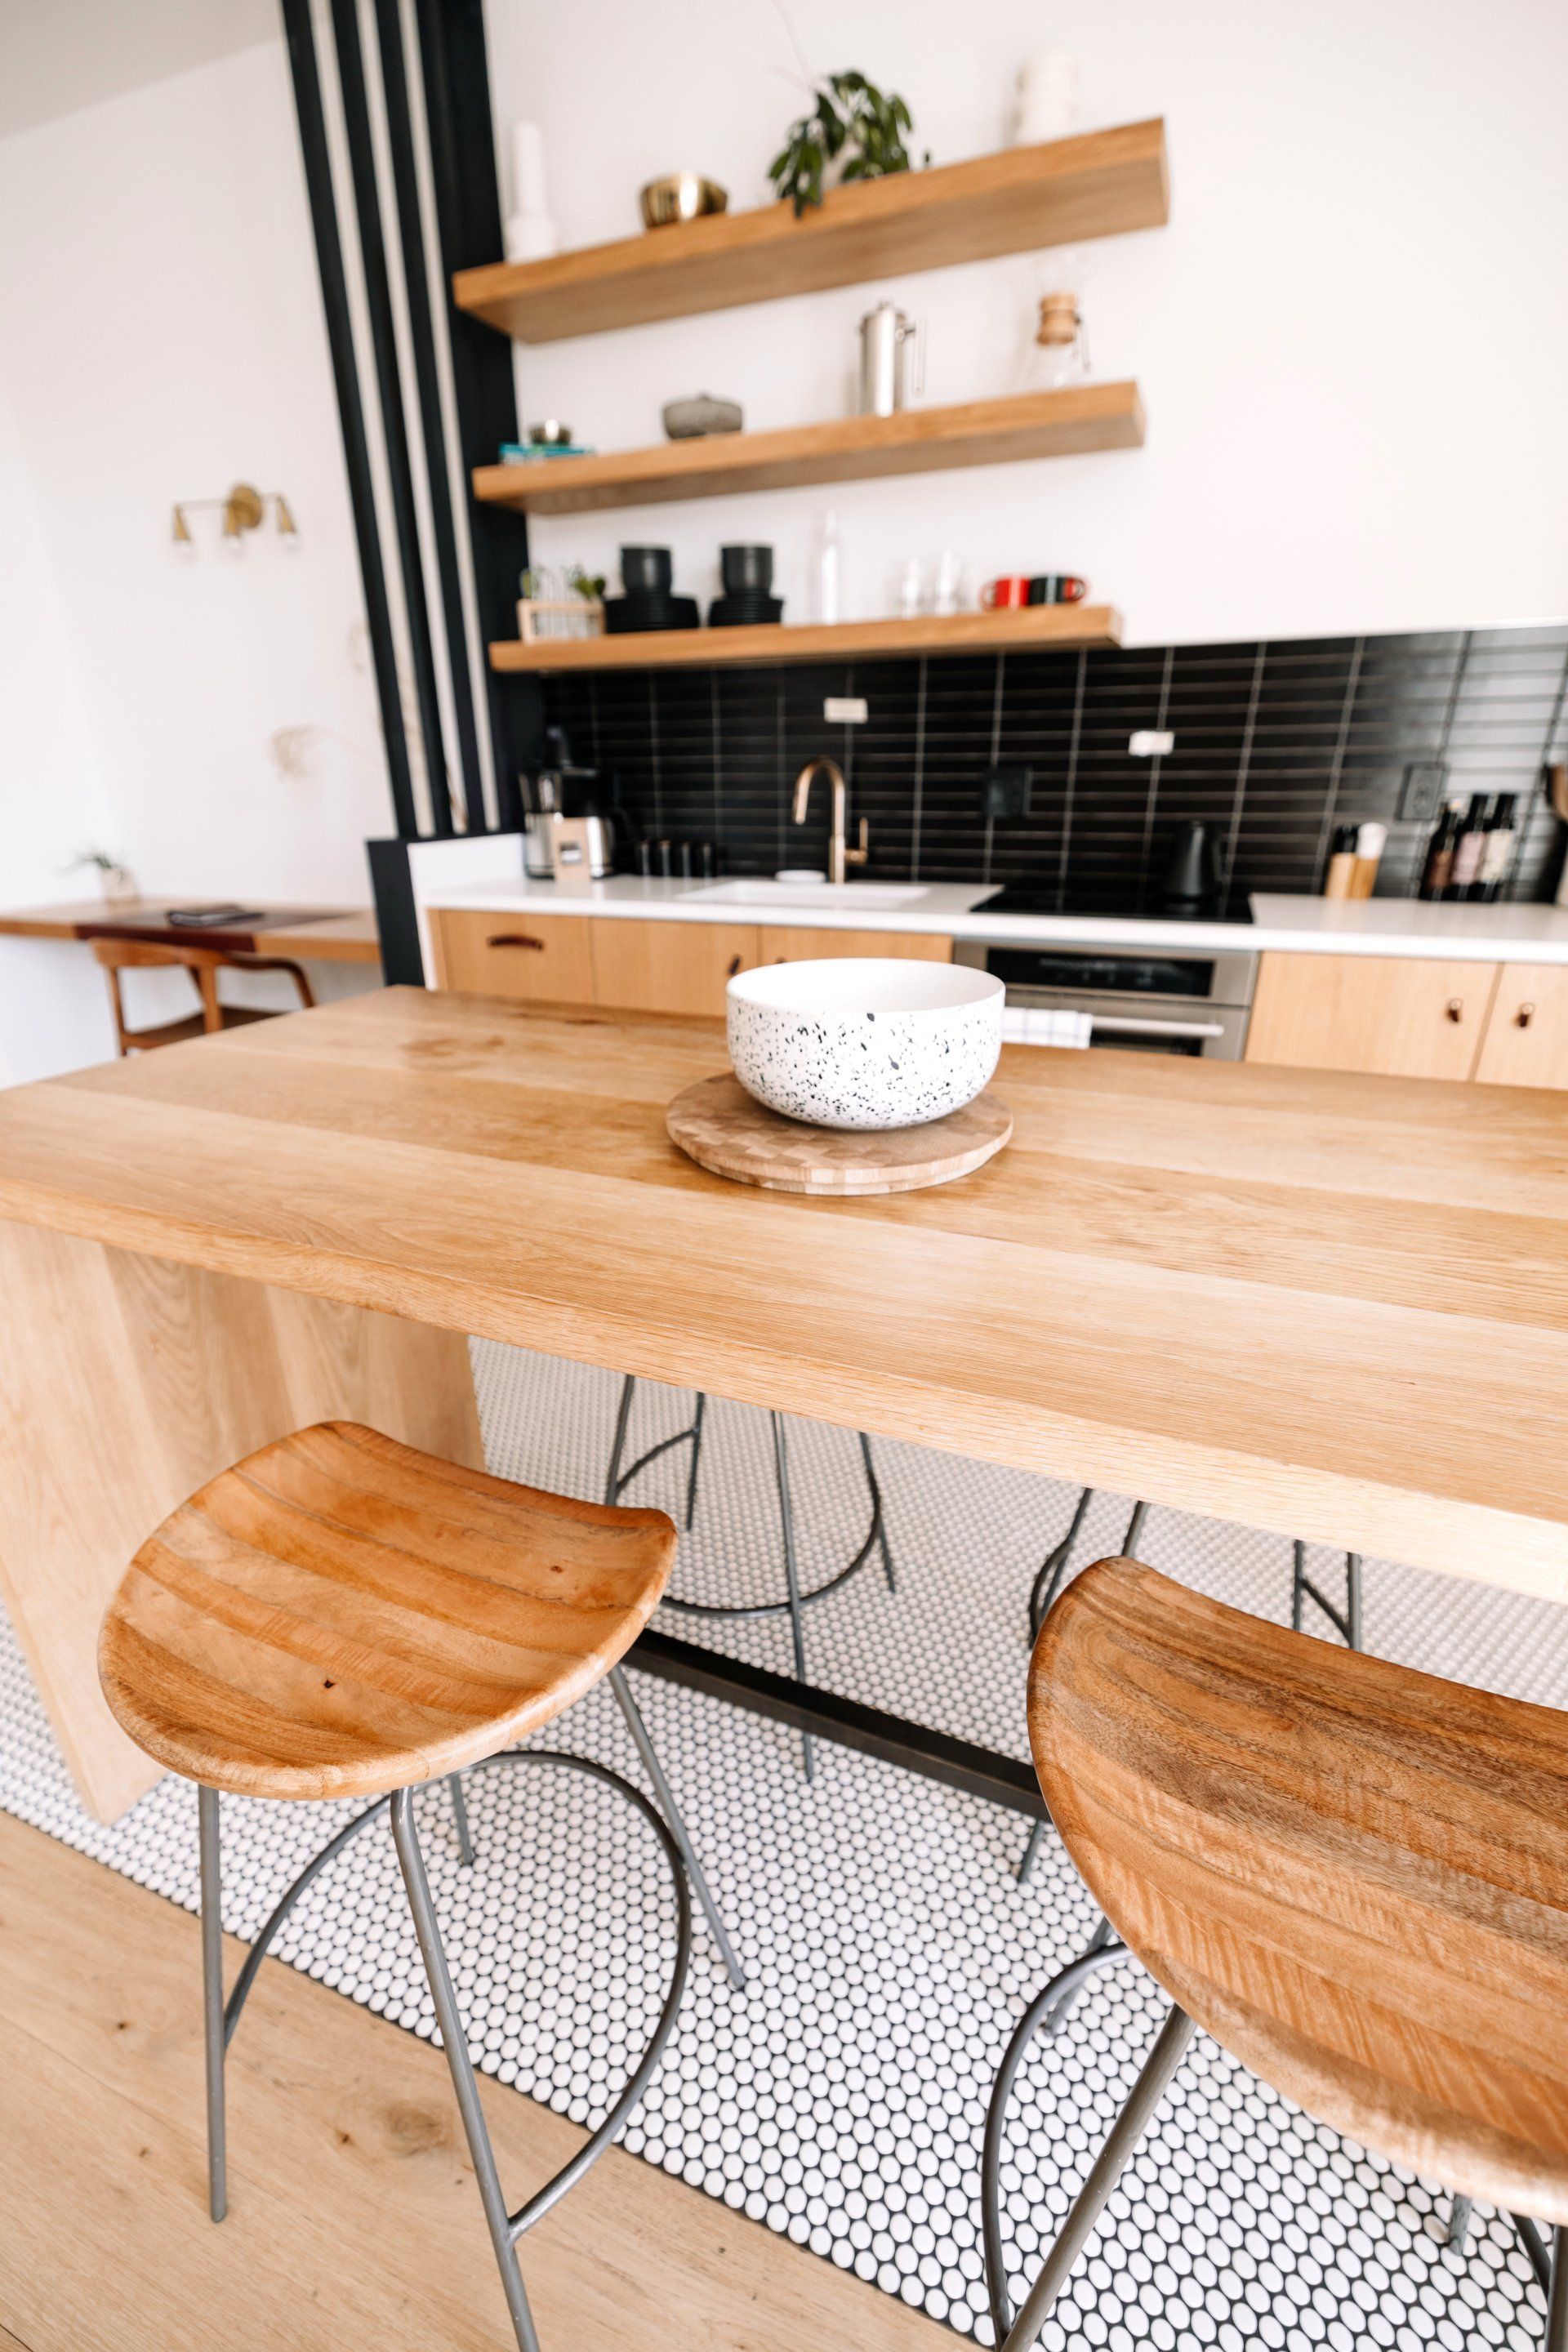 11 Ways To Turn Your Crowded Kitchen Into A Minimalist Space